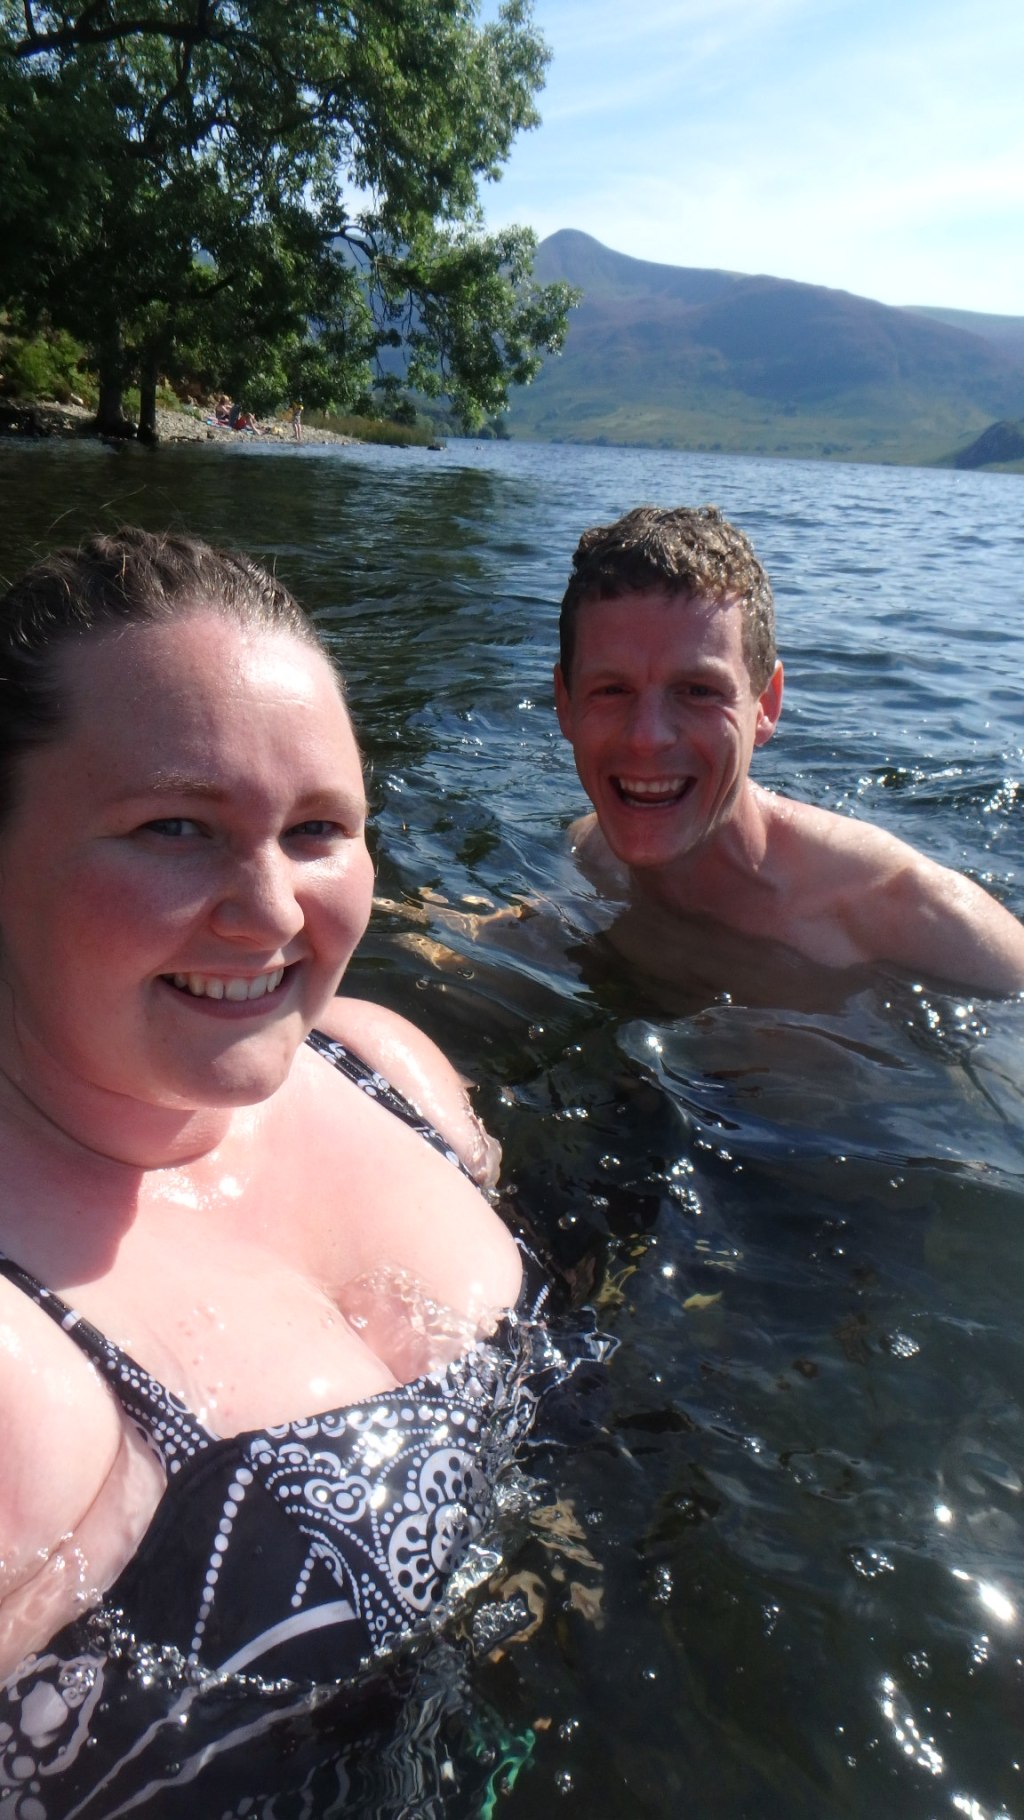 Making the most of the Lakes in the Lake District